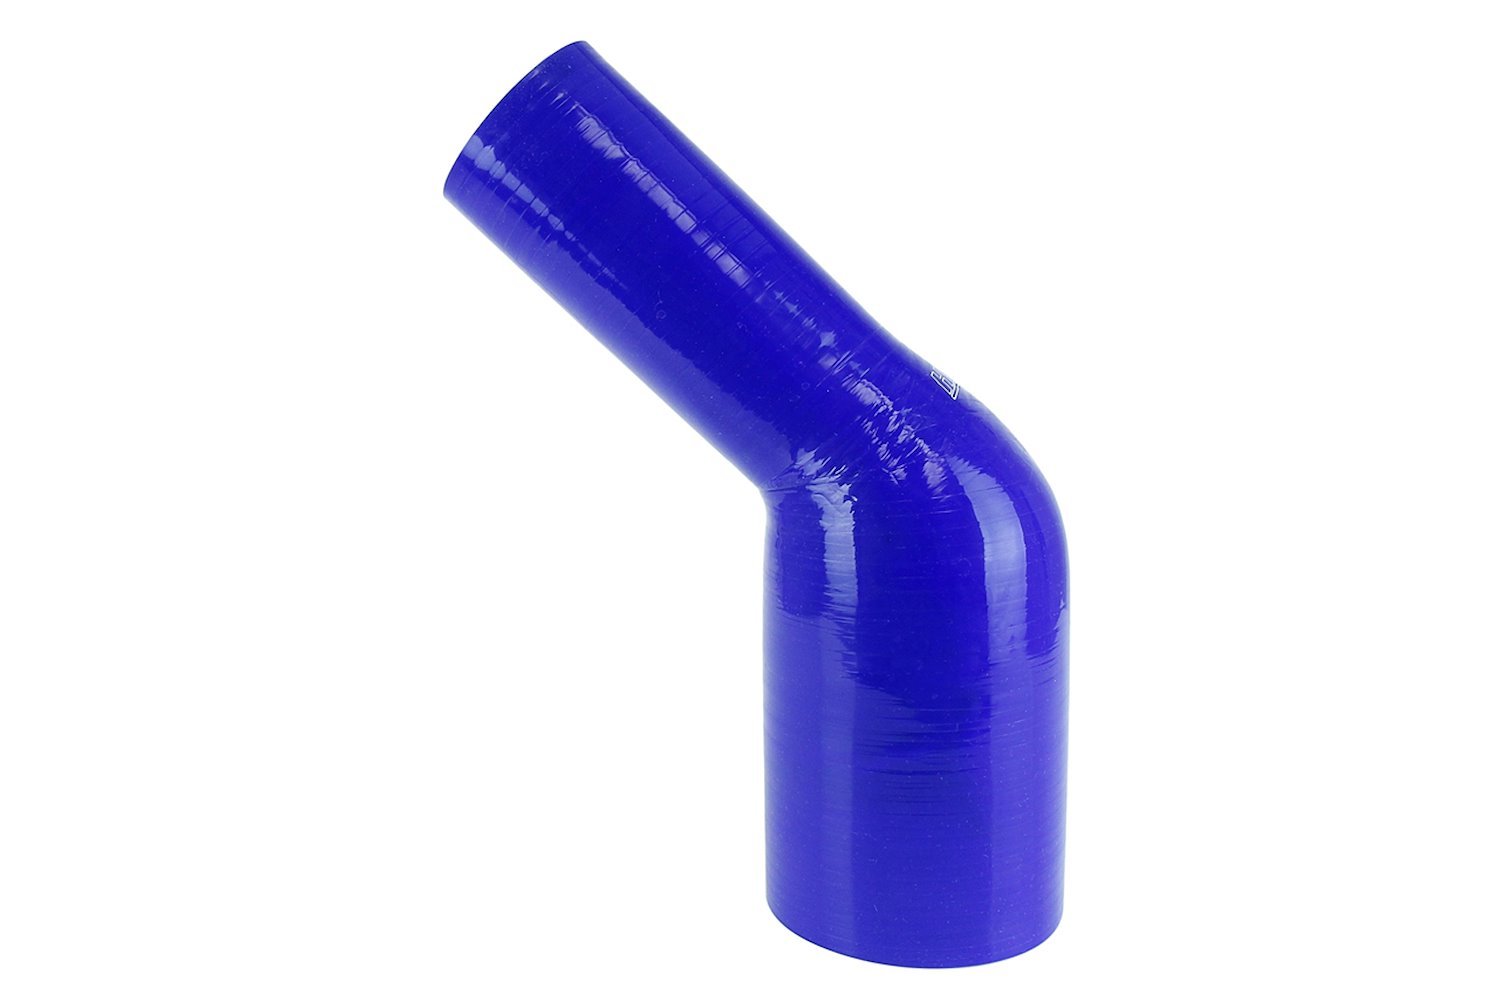 HTSER45-250-325-BLUE Silicone 45-Degree Elbow Hose, High-Temp 4-Ply Reinforced, 2-1/2 in. - 3-1/4 in. ID, Blue